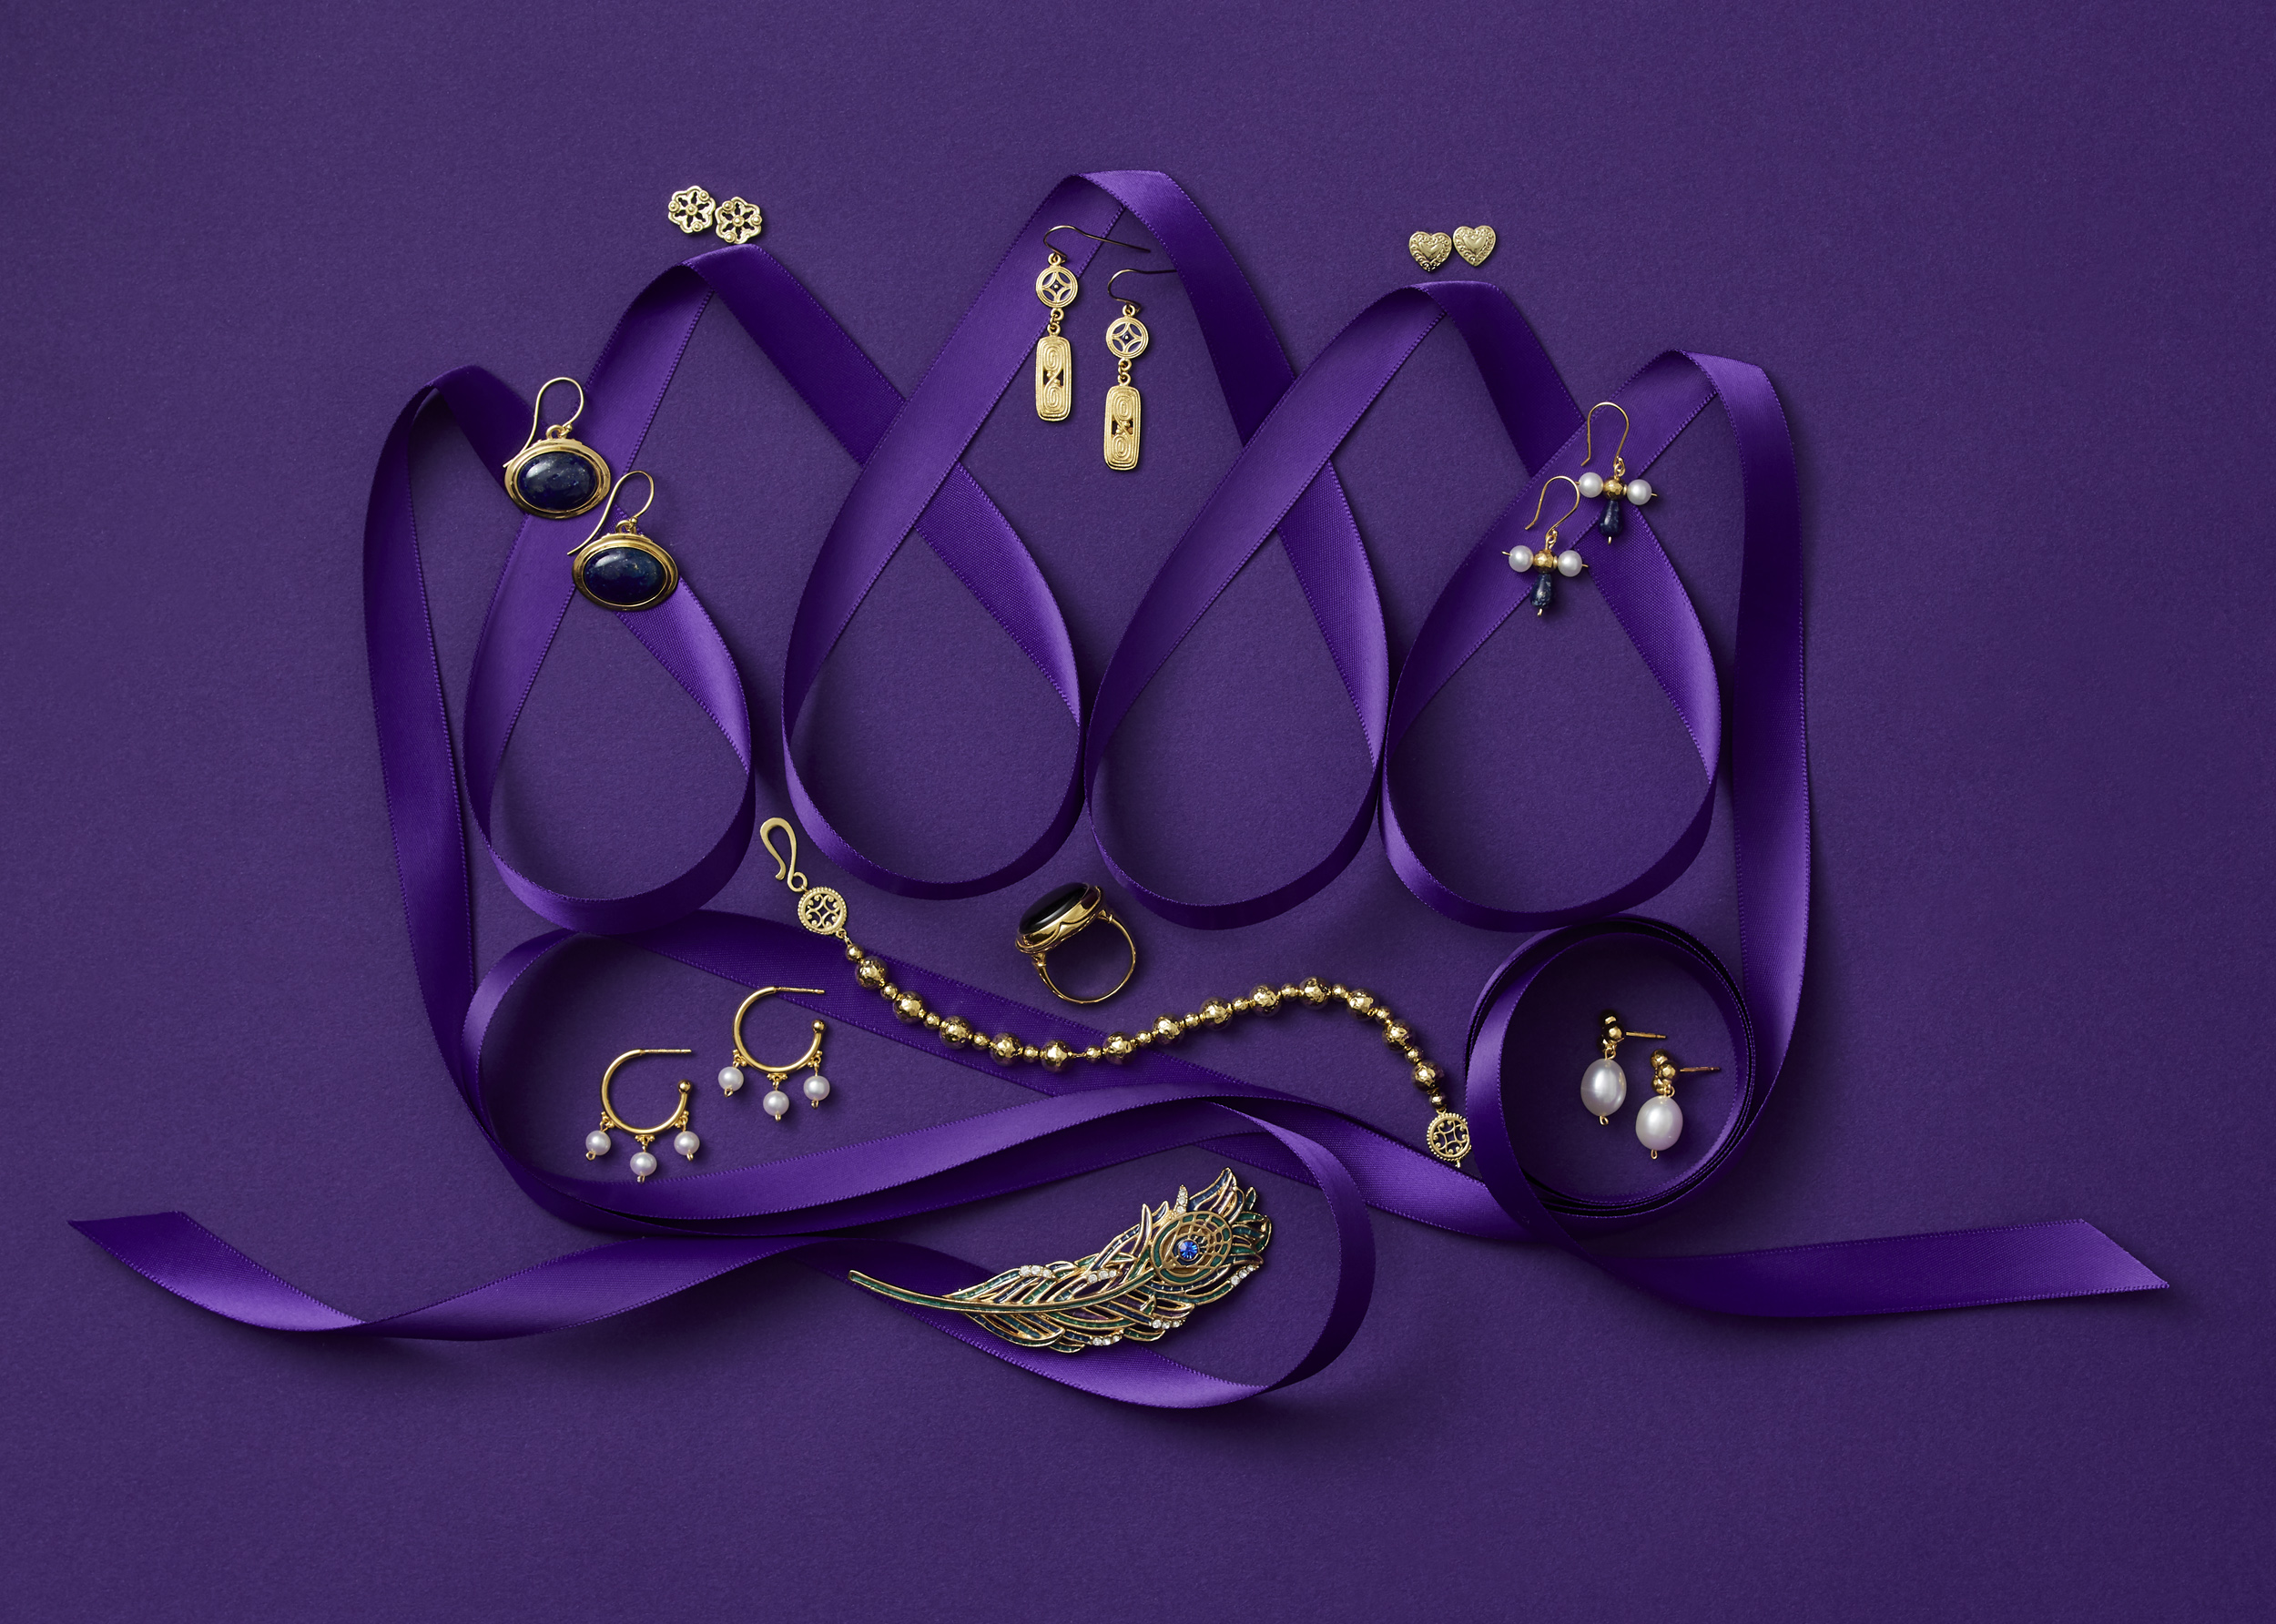 marketing shot of a crown made of purple ribbon adorned with gold and pearl jewelry including earrings, a pin, a ring, and bracelets on a purple background.